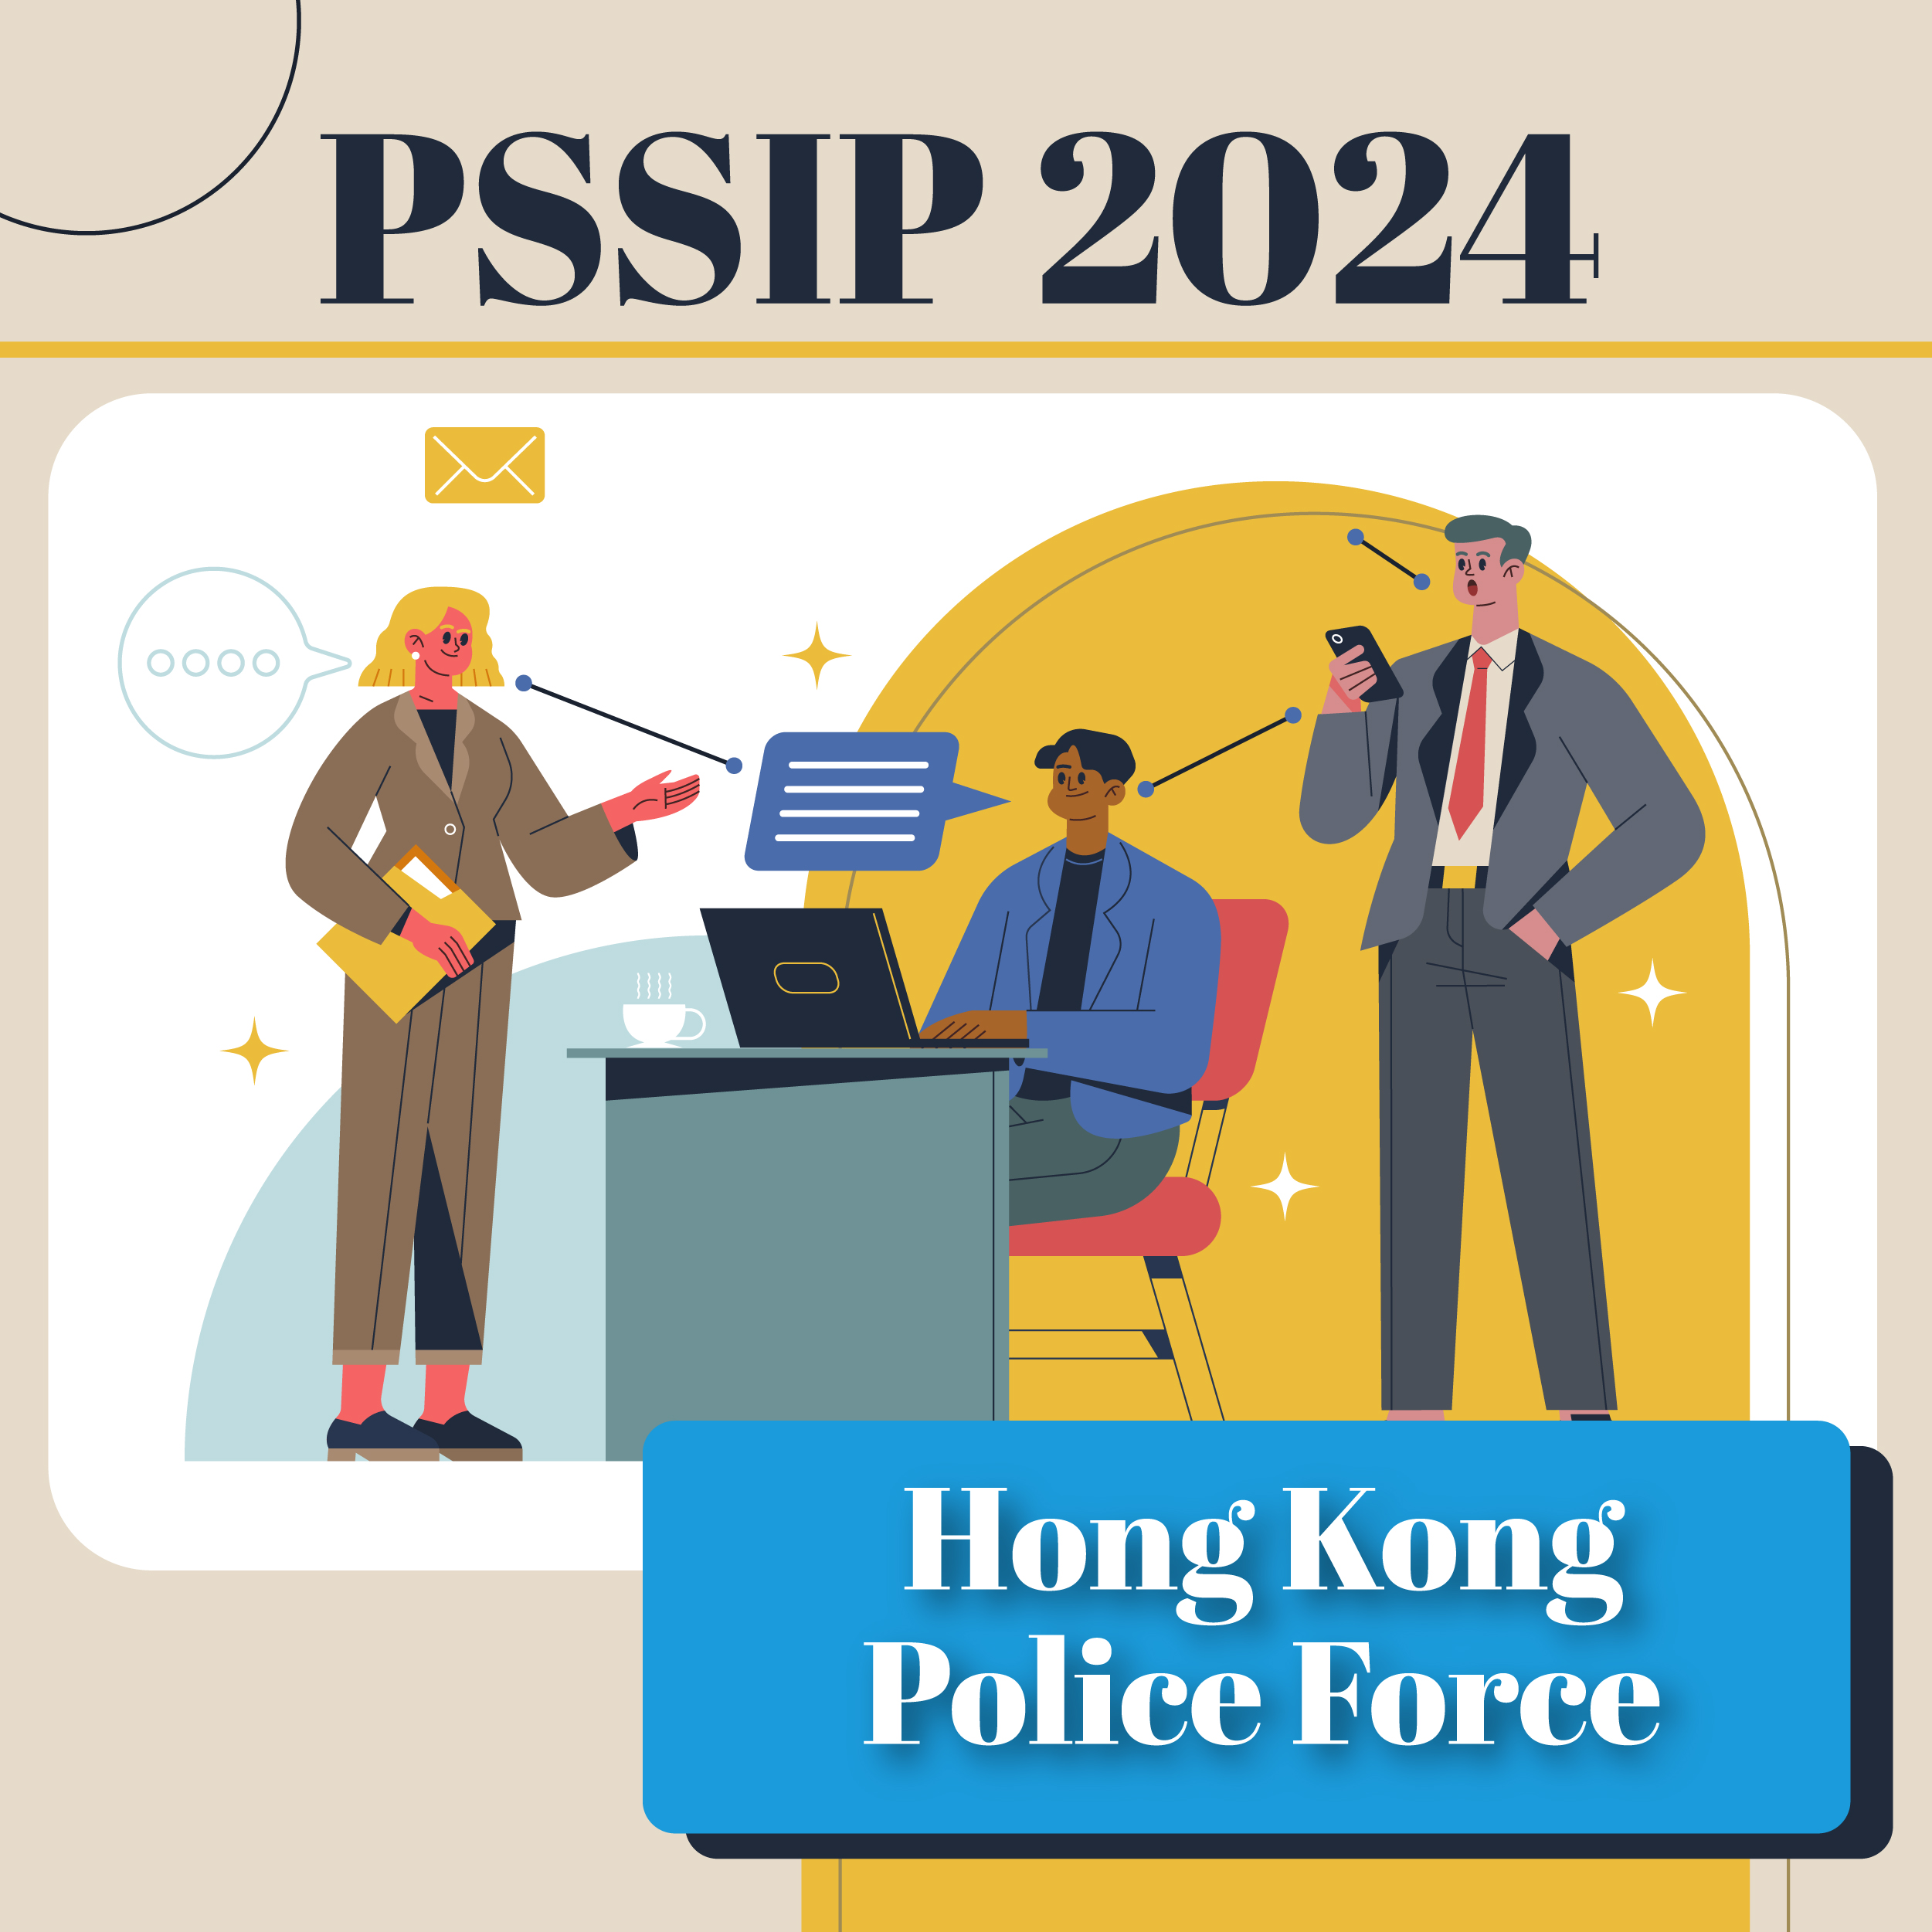 PSSIP2024 – Police College, Learning Technologies Division, HKPF